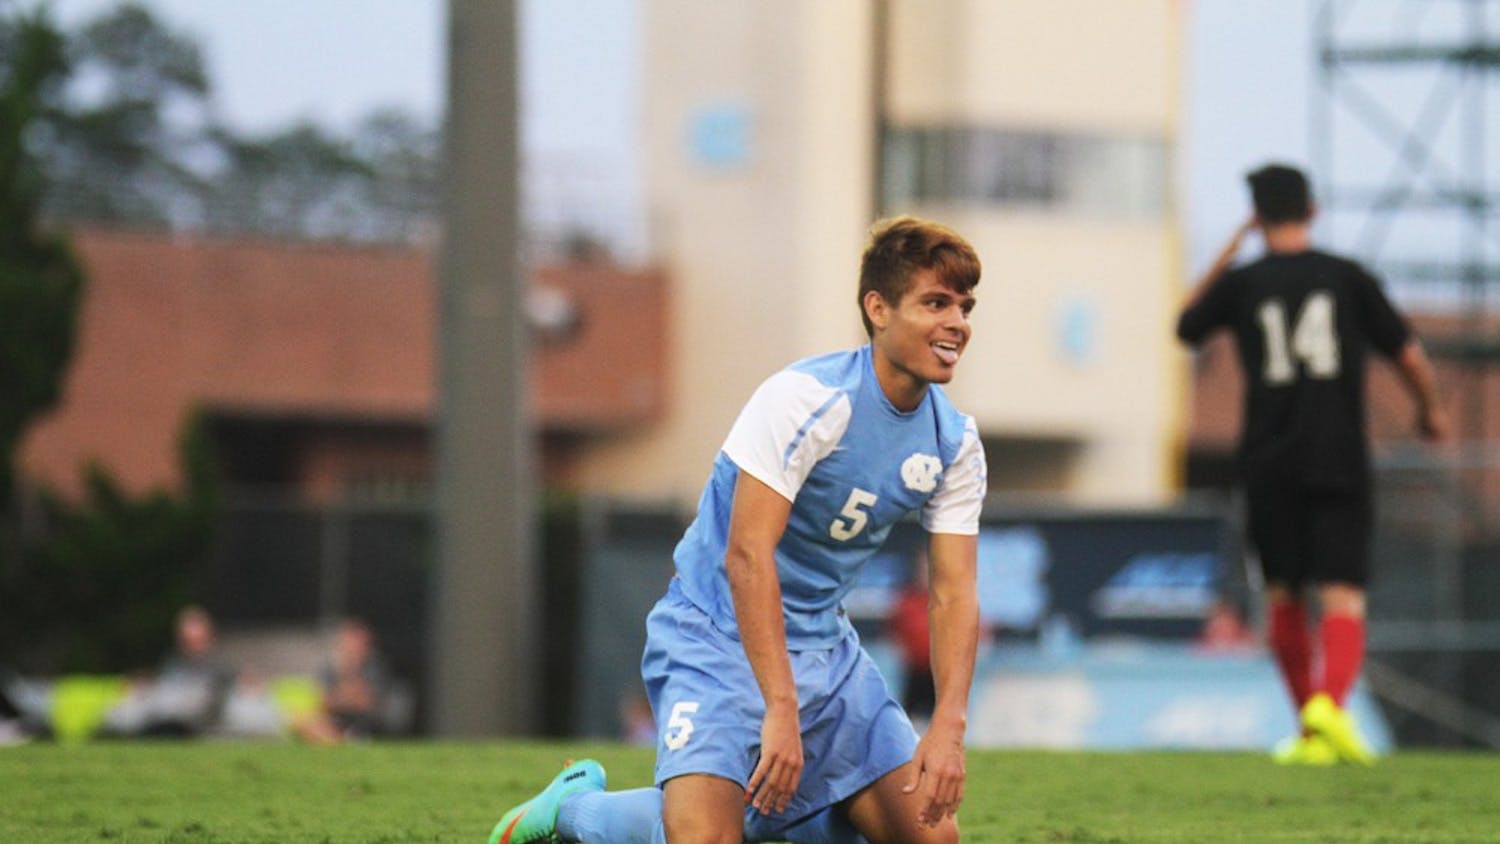 UNC forward, Alan Winn, smiles after a near miss on goal during the first half.  He finished with a goal by match end.  UNC defeated Gardner-Webb 7-0 Friday night at Fetzer field in an exhibition game.